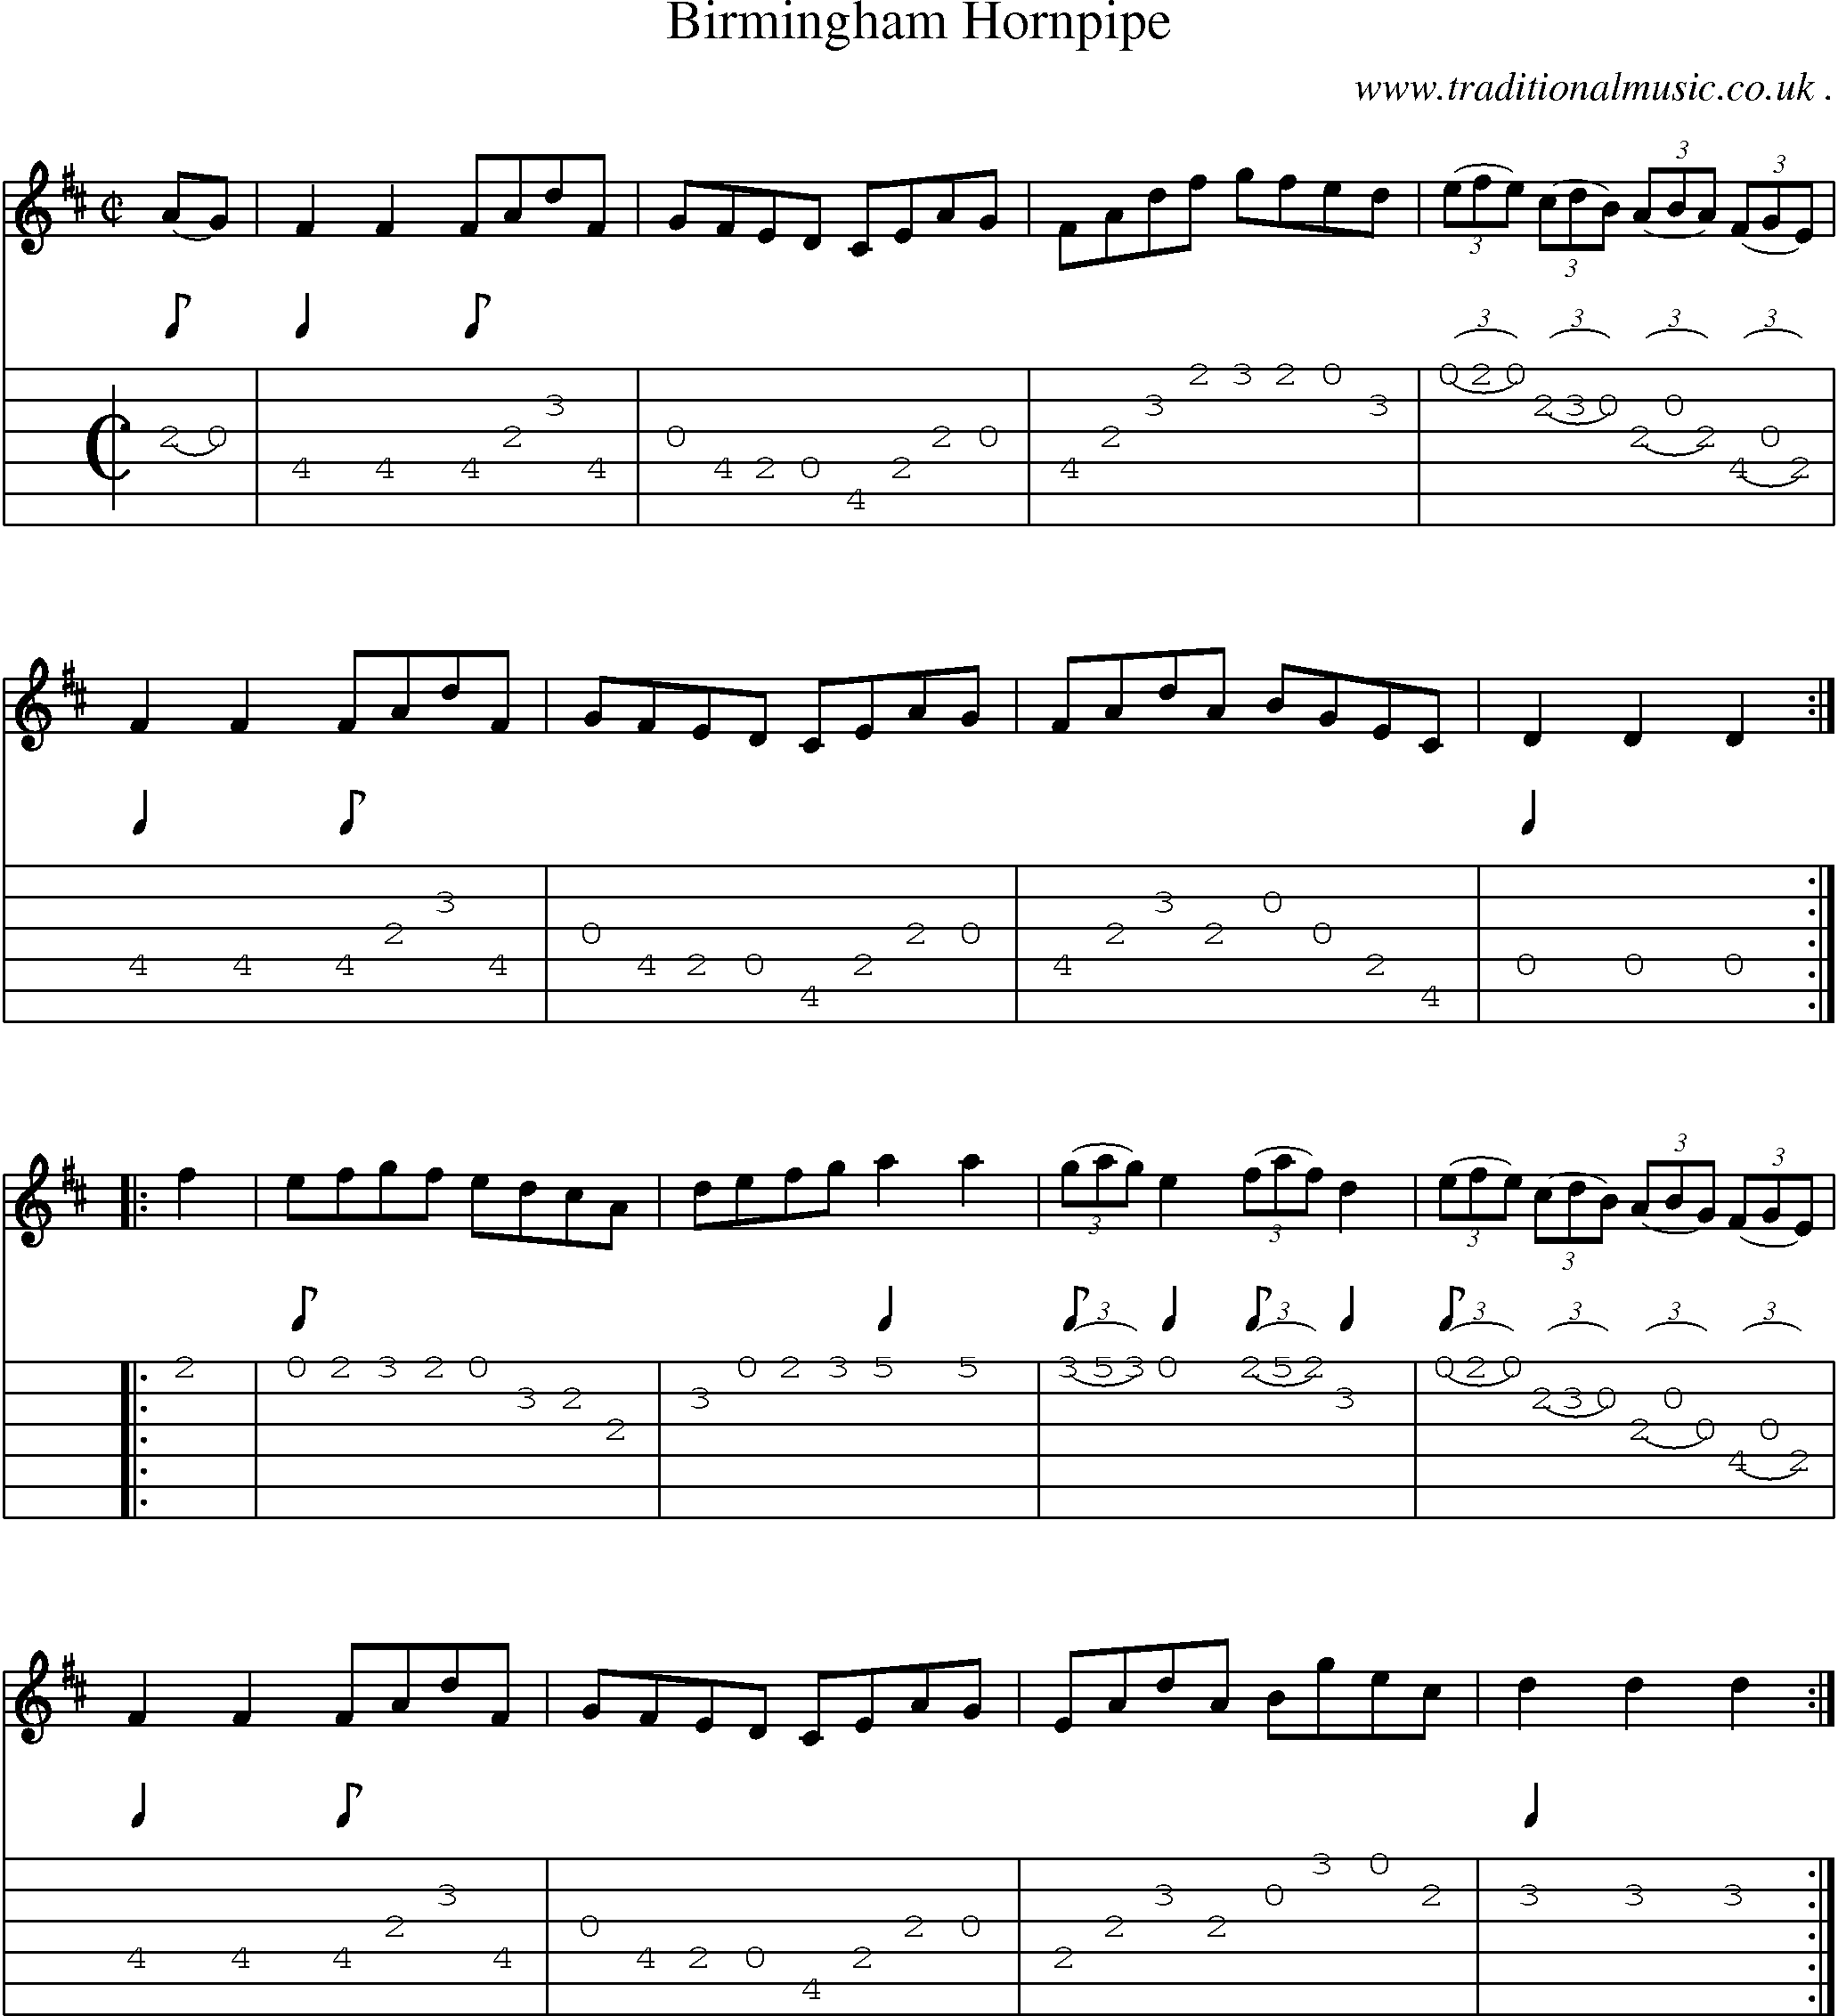 Sheet-Music and Guitar Tabs for Birmingham Hornpipe